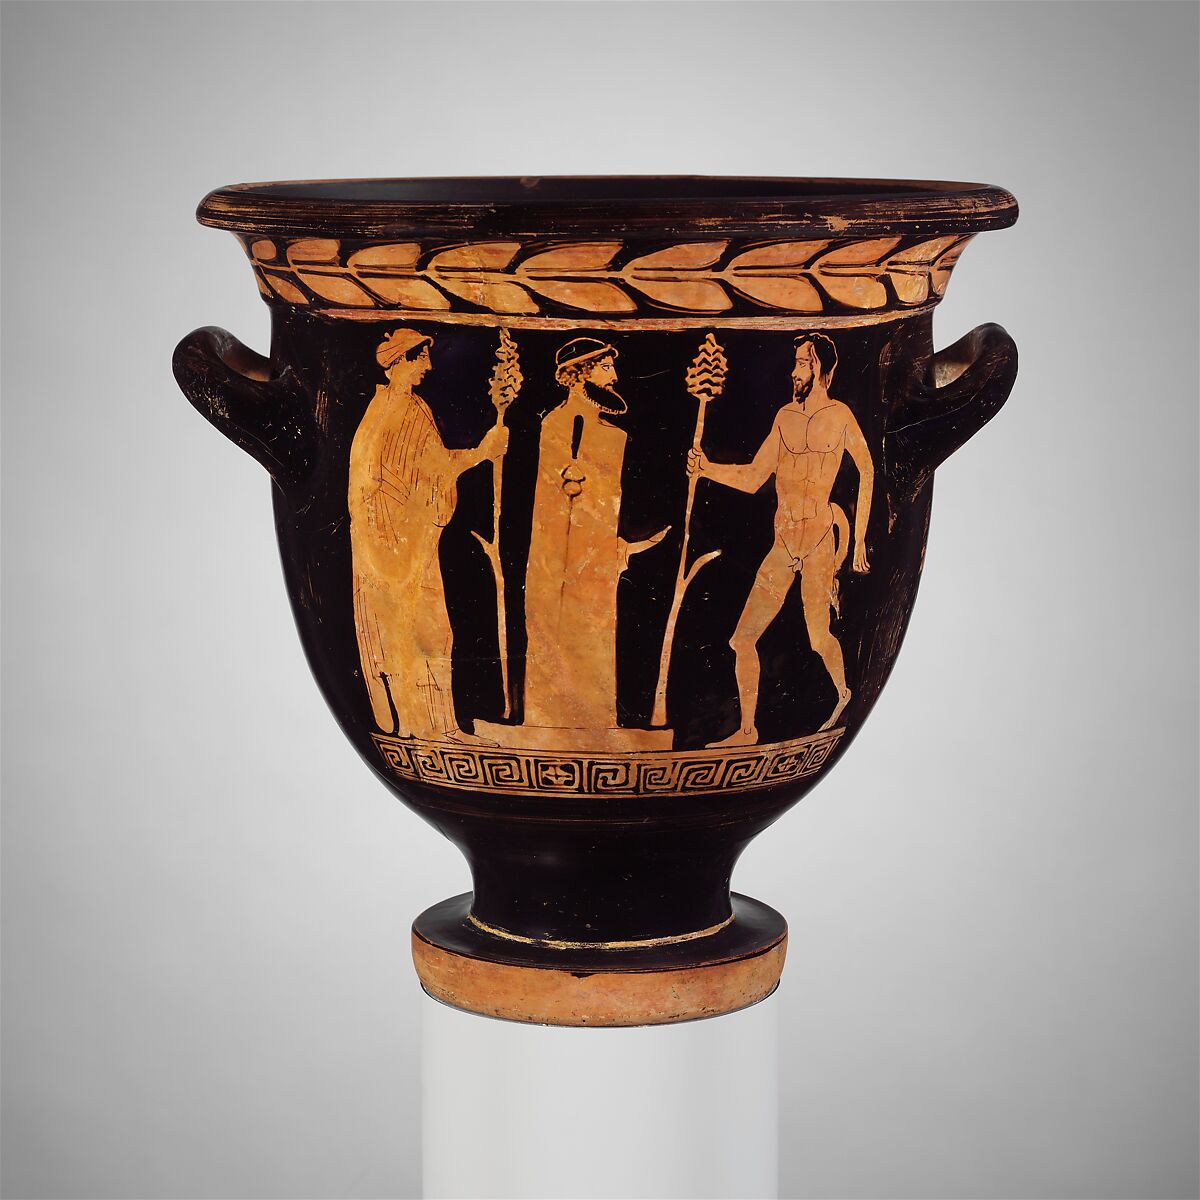 Terracotta bell-krater (mixing bowl), Attributed to the Pisticci Painter, Terracotta, Greek, South Italian, Lucanian 